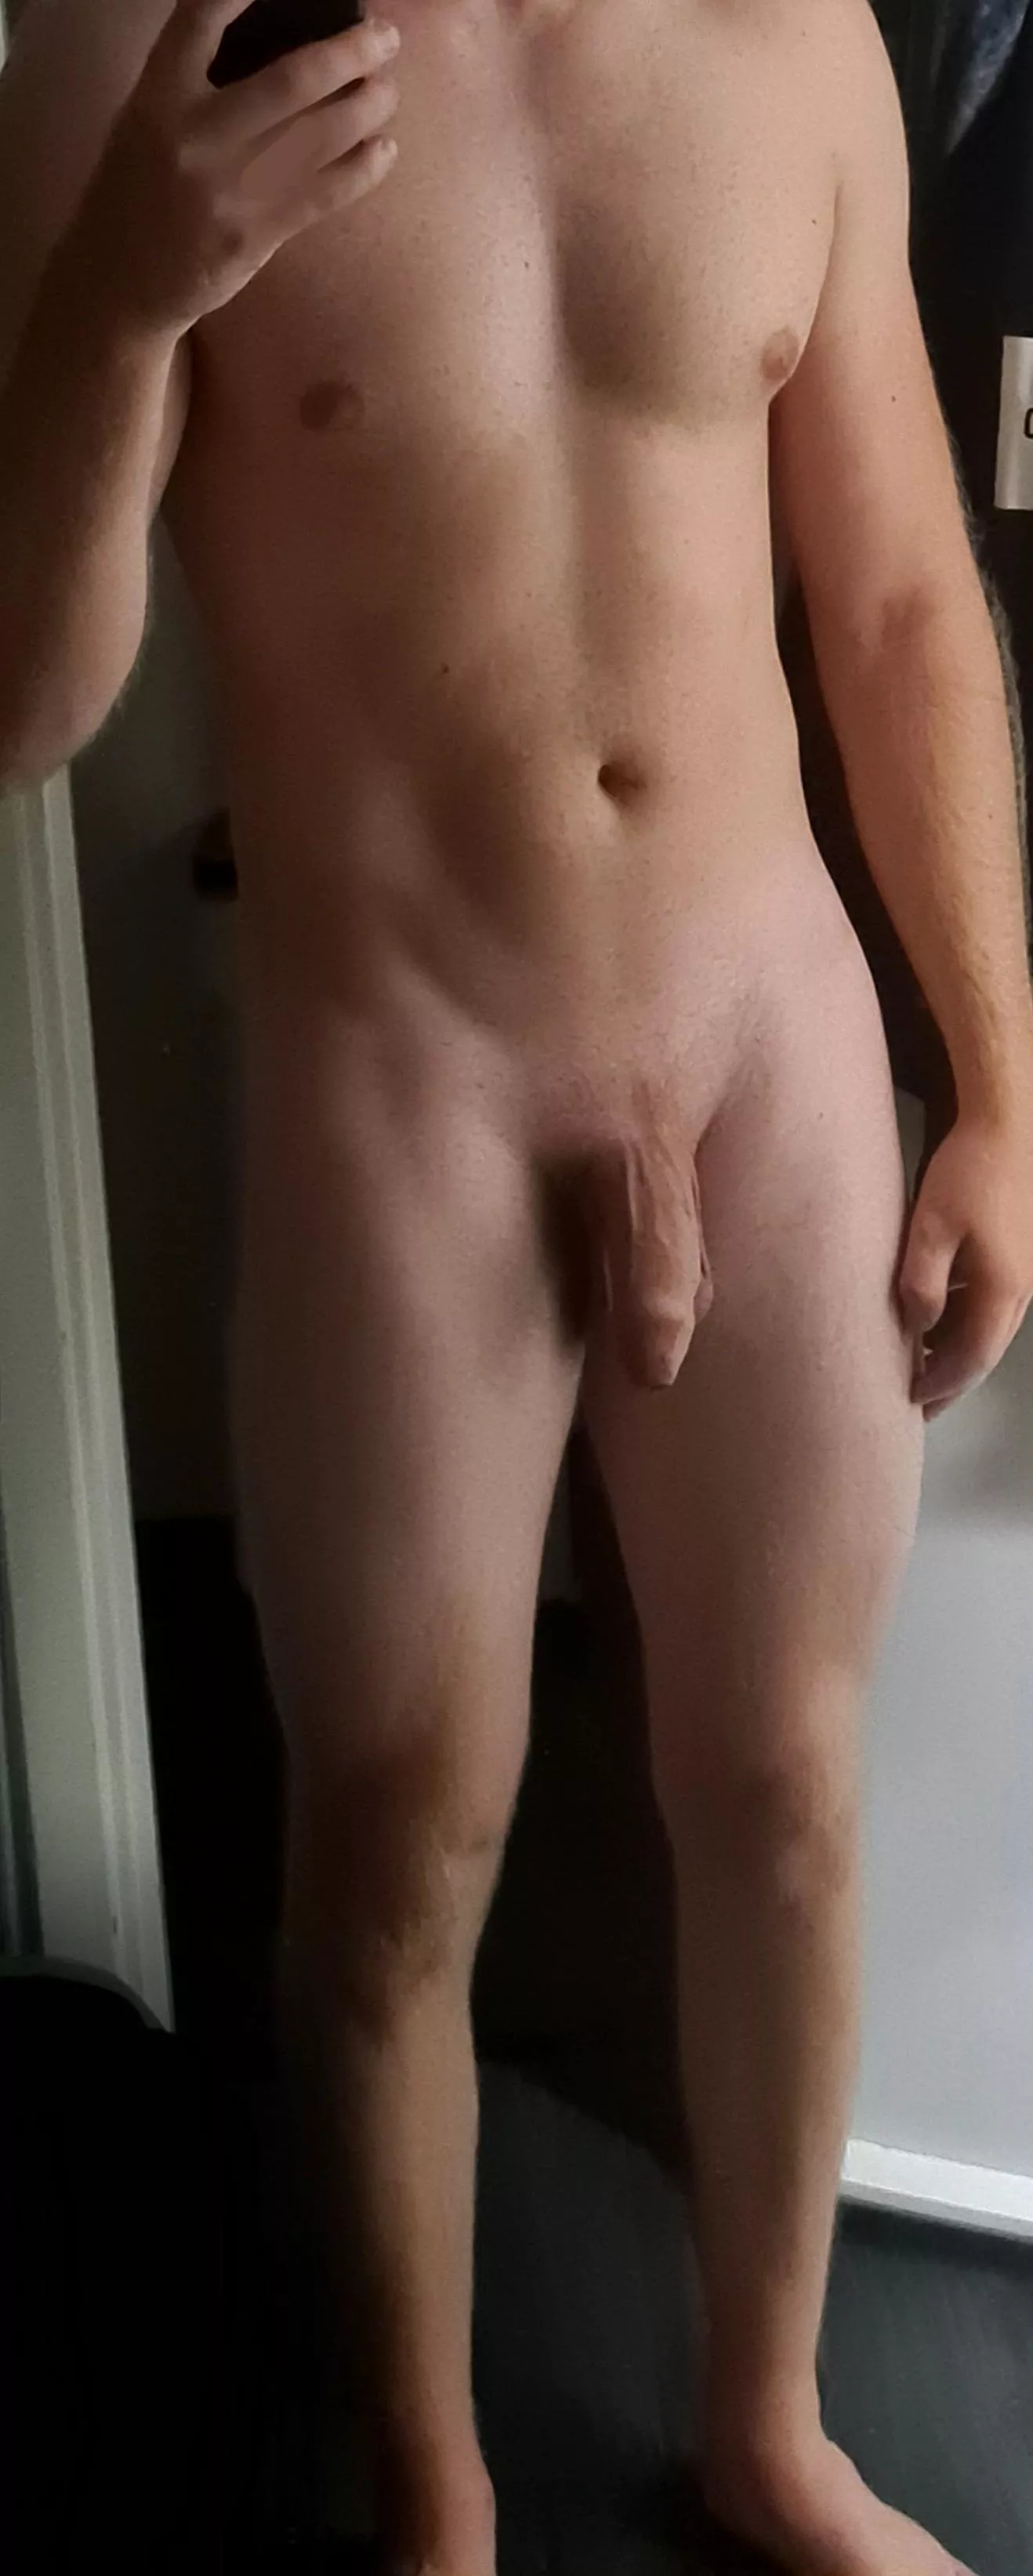 Porn 70kg - m26 70kg 178cm im curious. what do you think about my skinny body? nudes |  Watch-porn.net